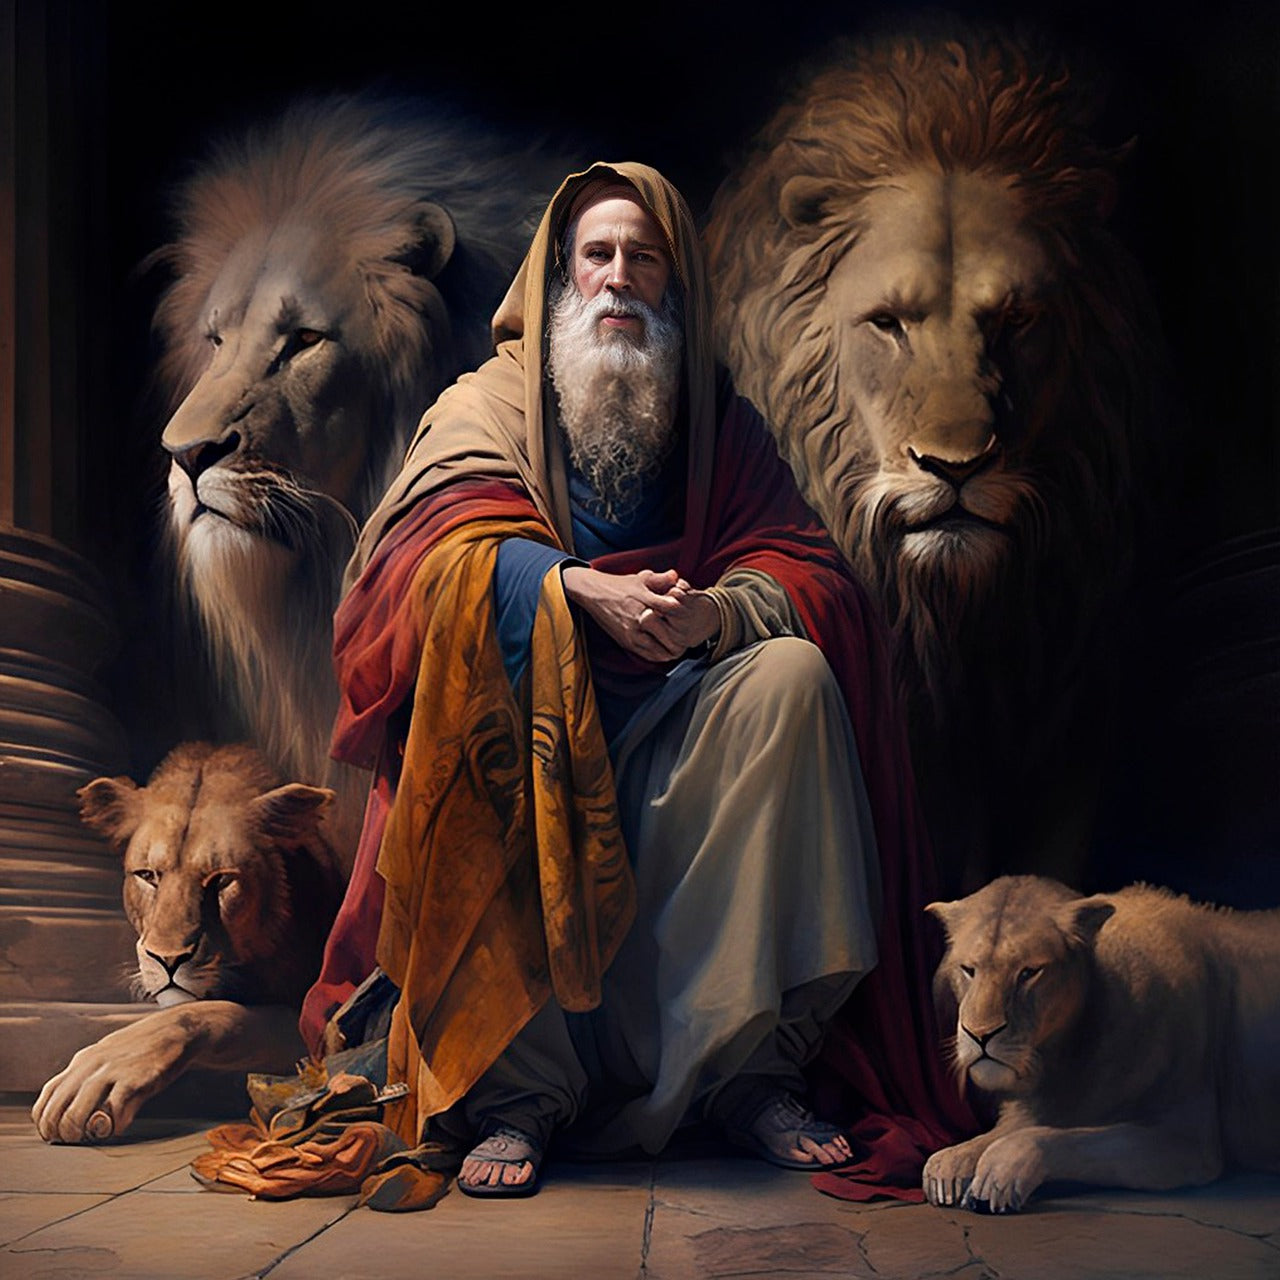 50 Reasons We Are in the End Times - Lamb & Lion Ministries